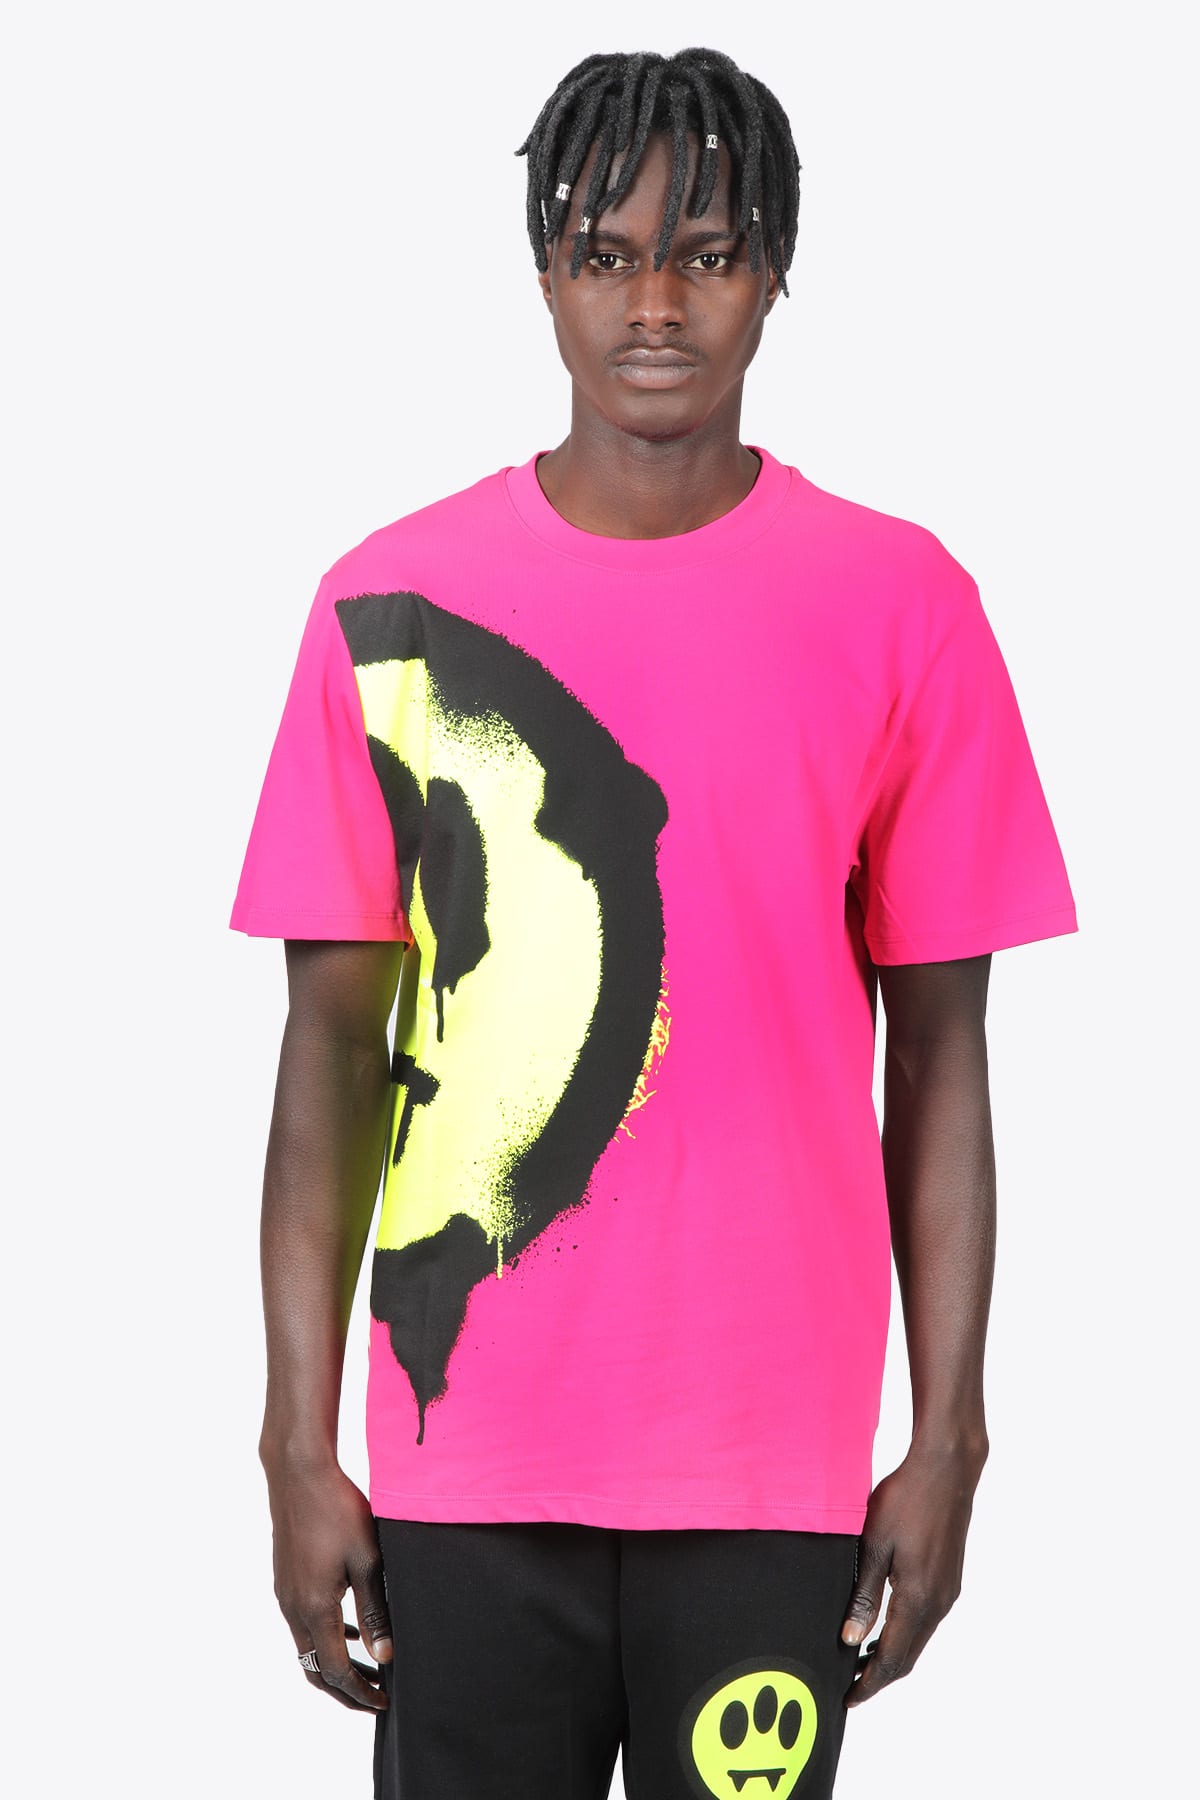 Barrow T-shirt Jersey Unisex Bright pink cotton t-shirt with side smile